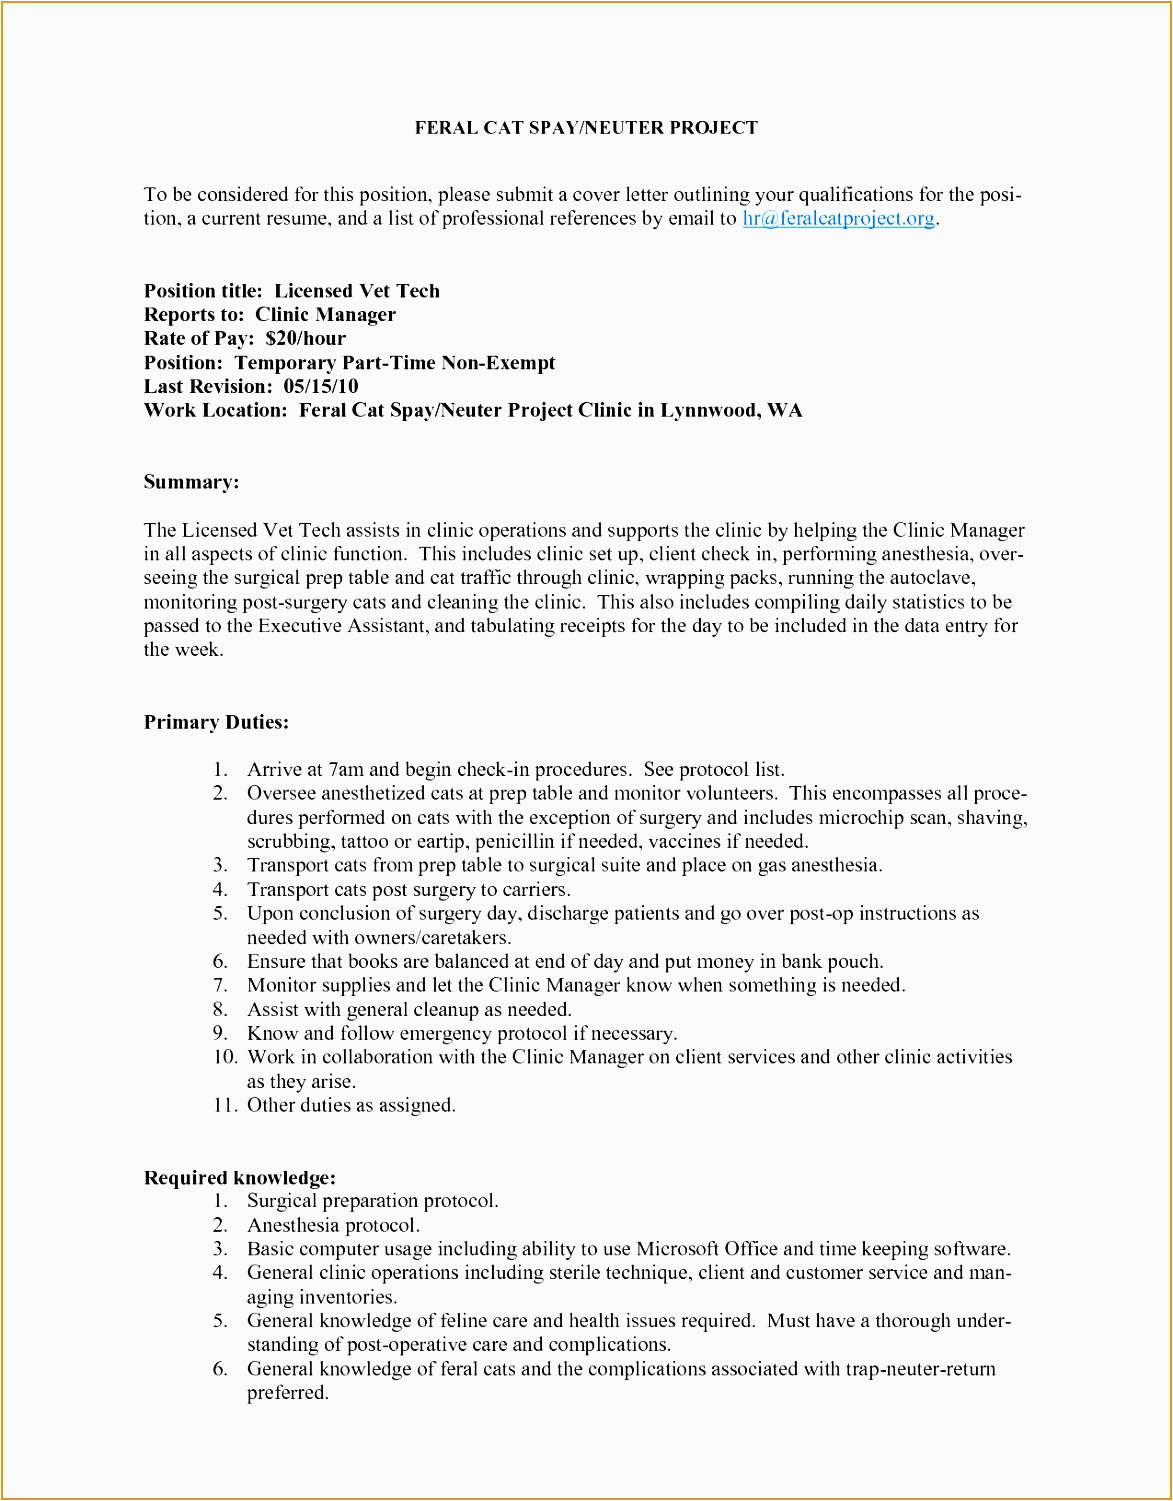 salary requirements cover letter g